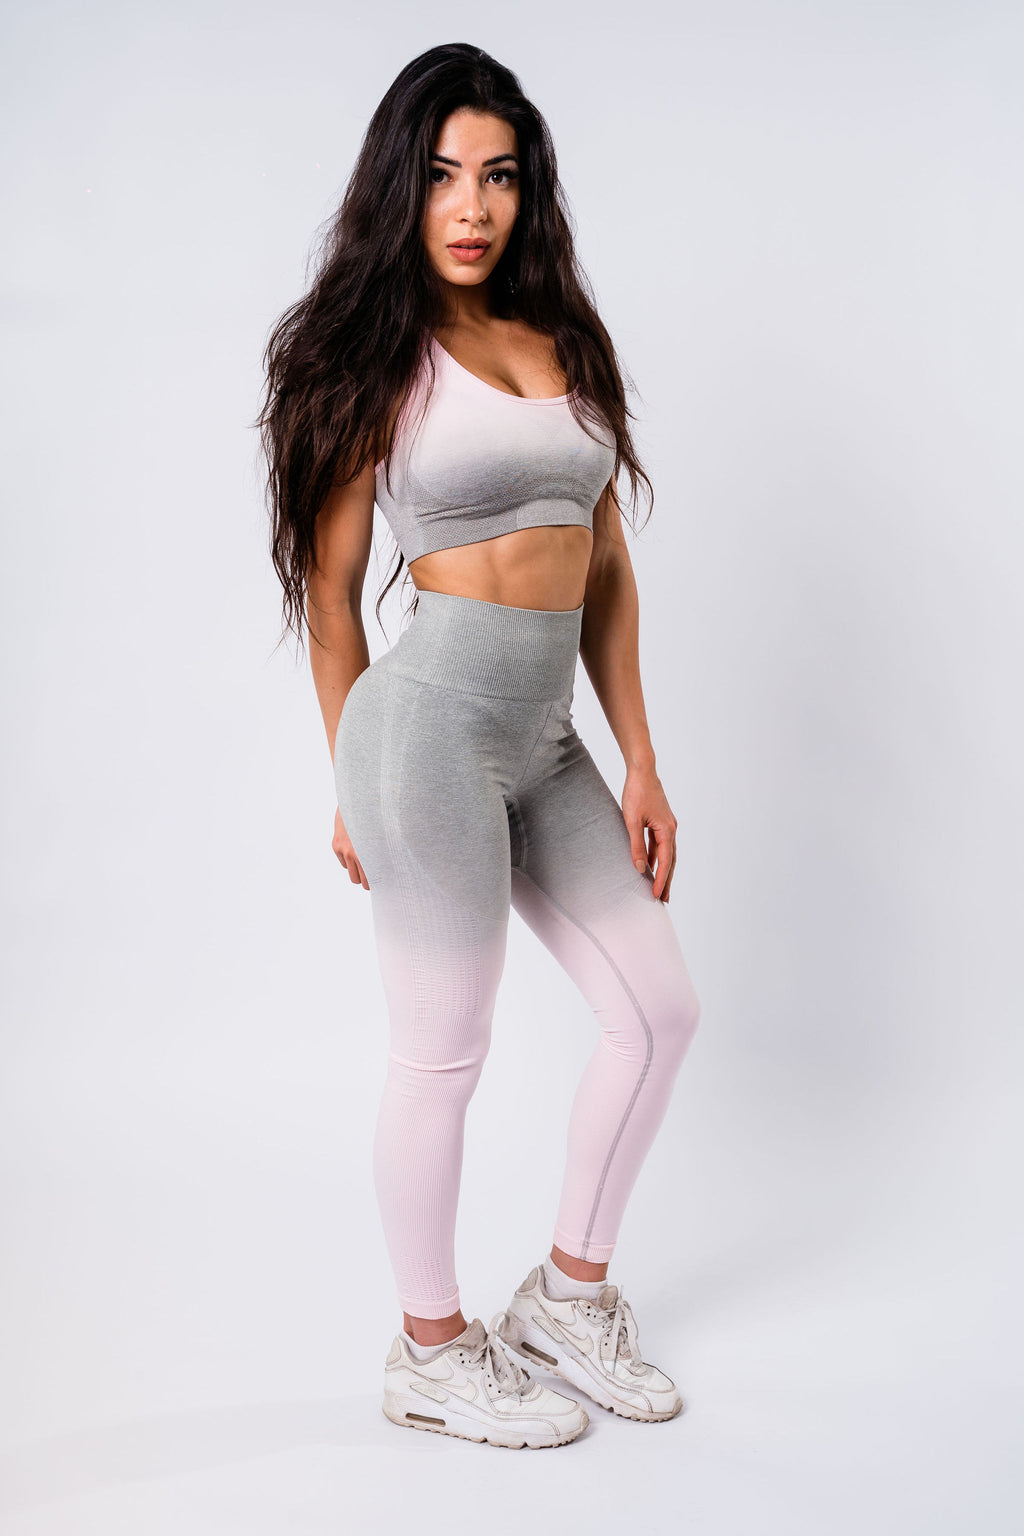 Stylish And Fashionable Women's Ombre Workout Set For The Gym